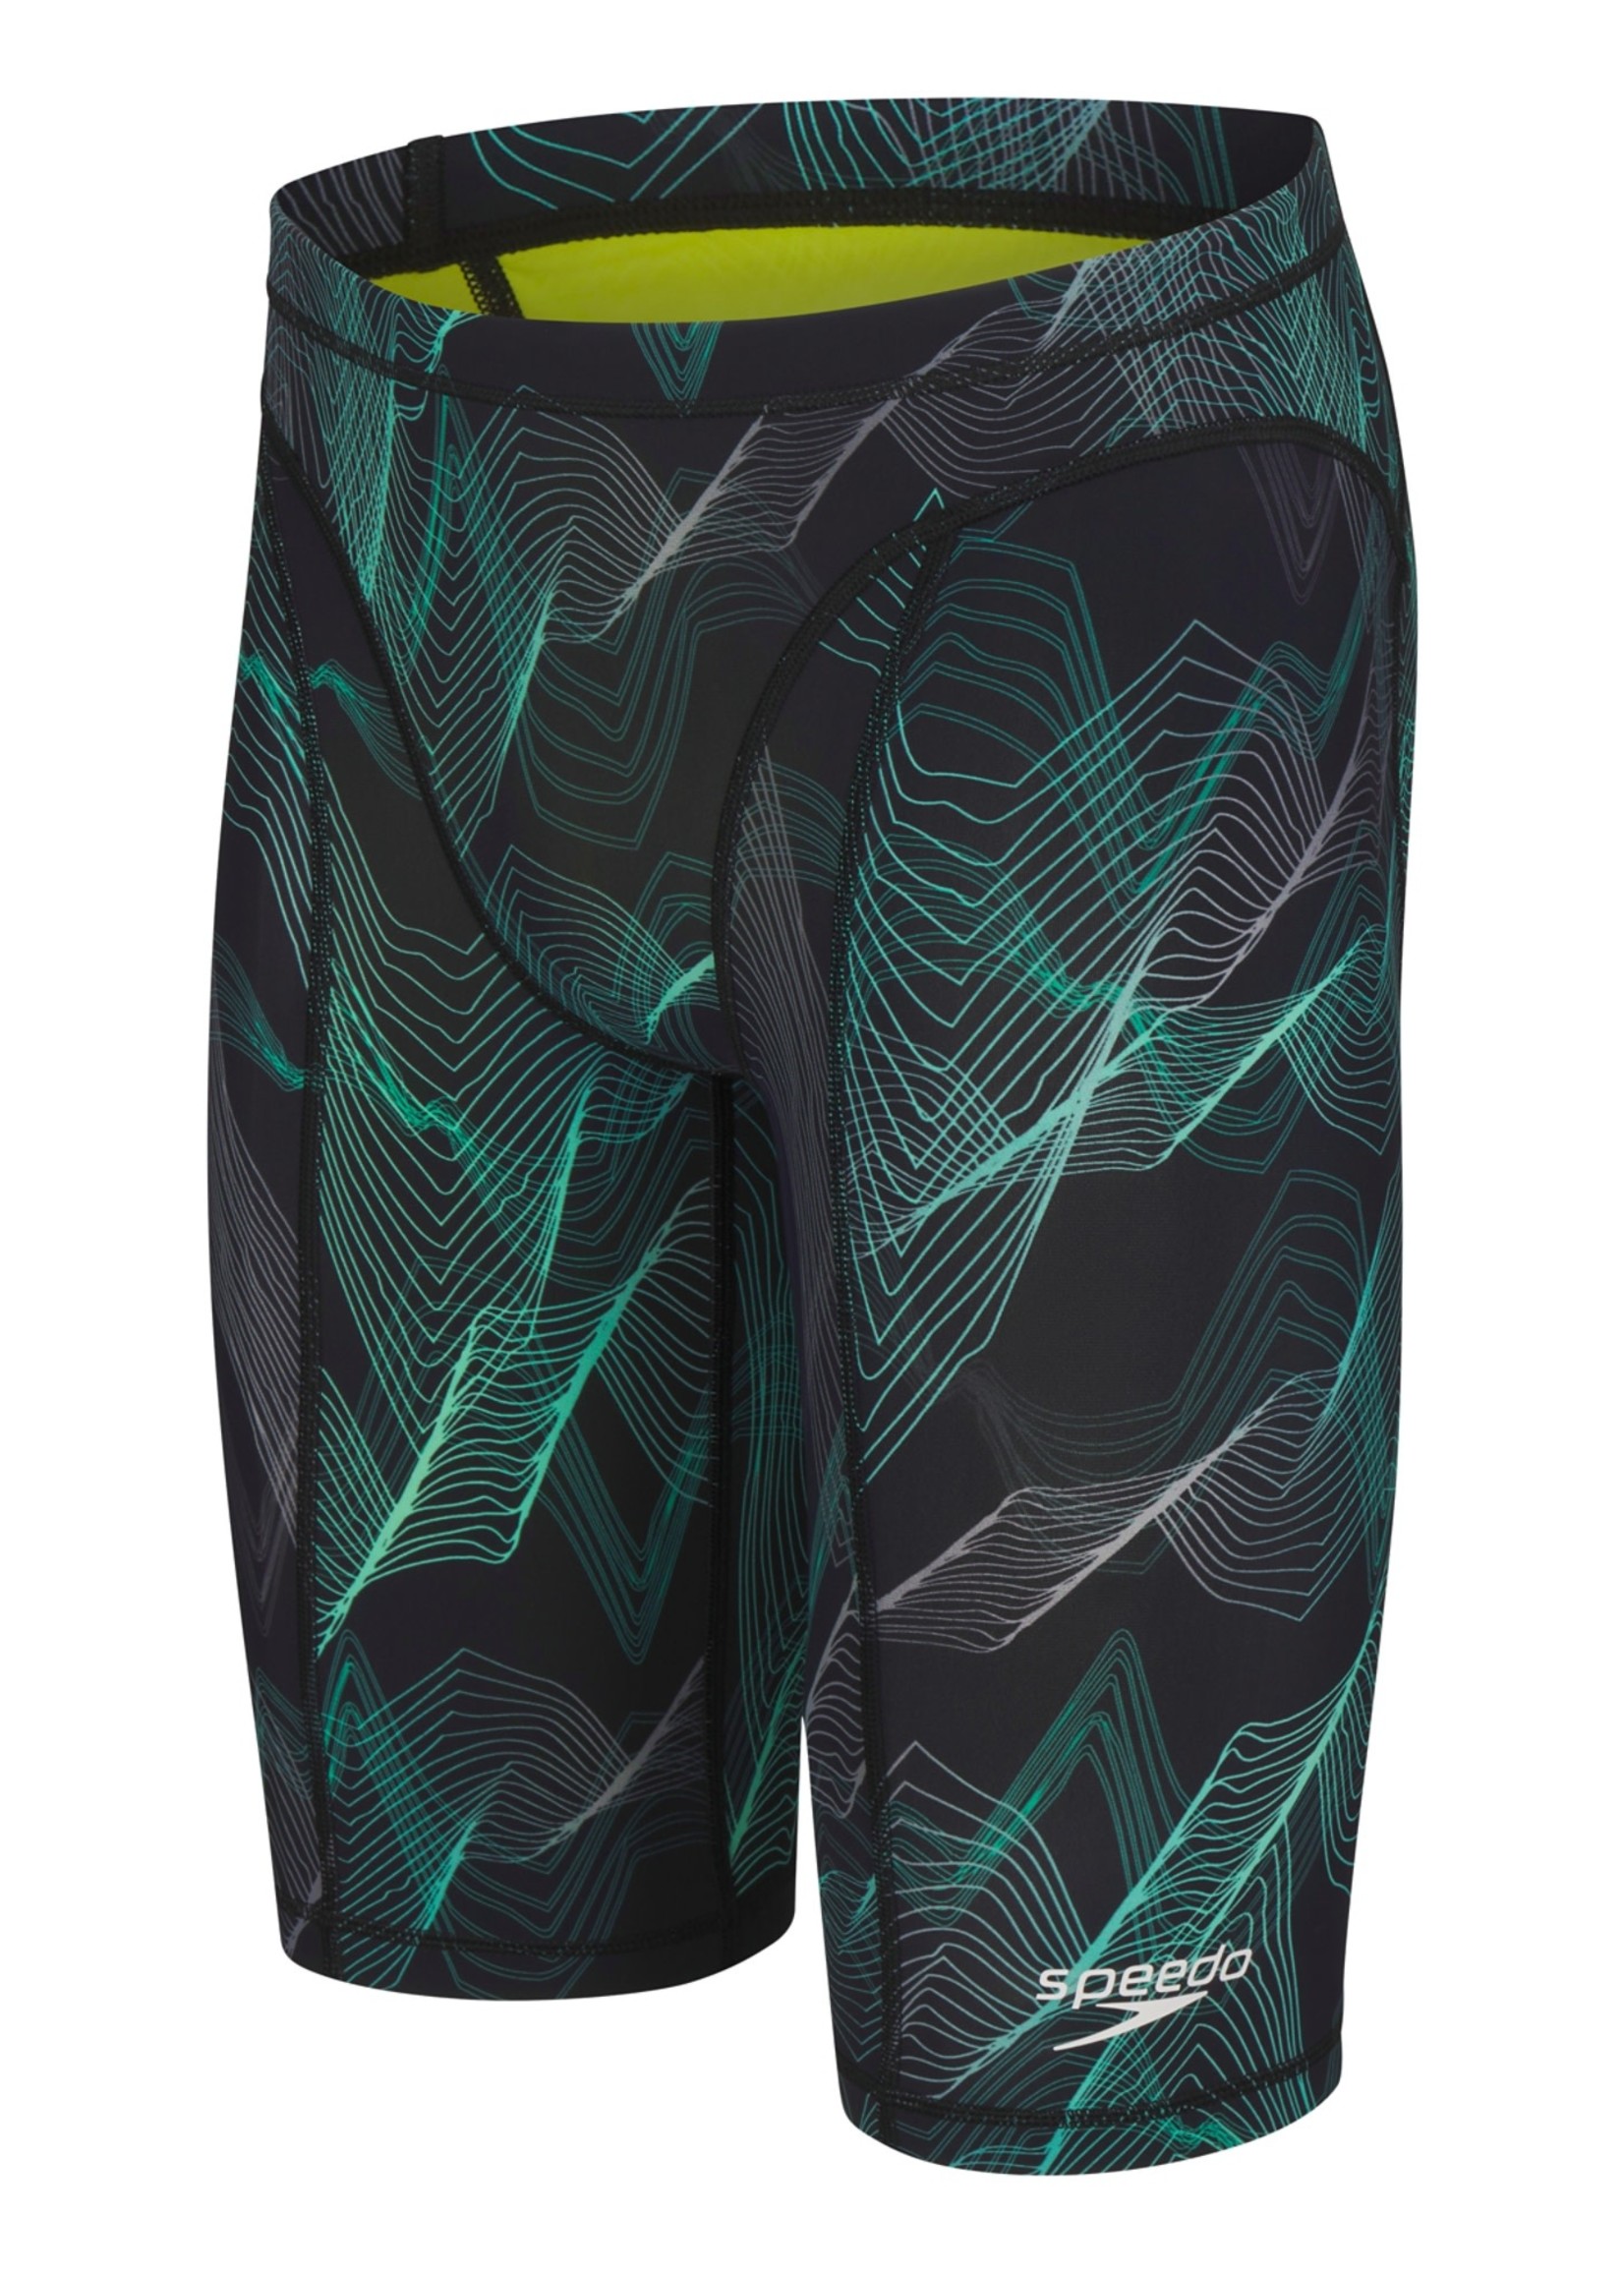 Printed Vanquisher Jammer 440 New Turquoise